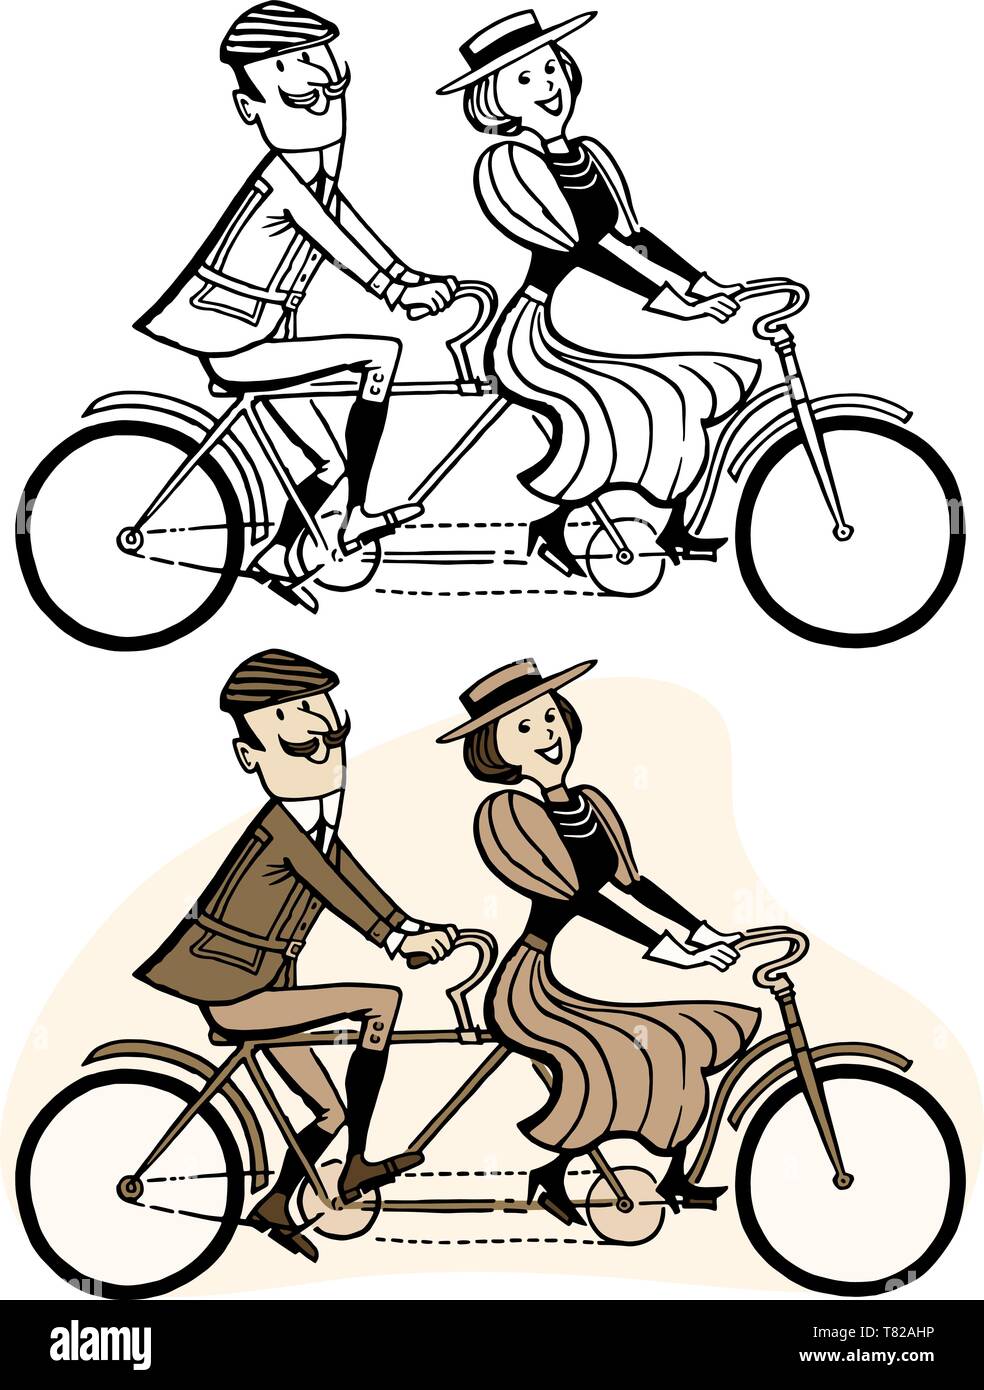 A couple goes for a ride on an old fashioned tandem bicycle. Stock Vector